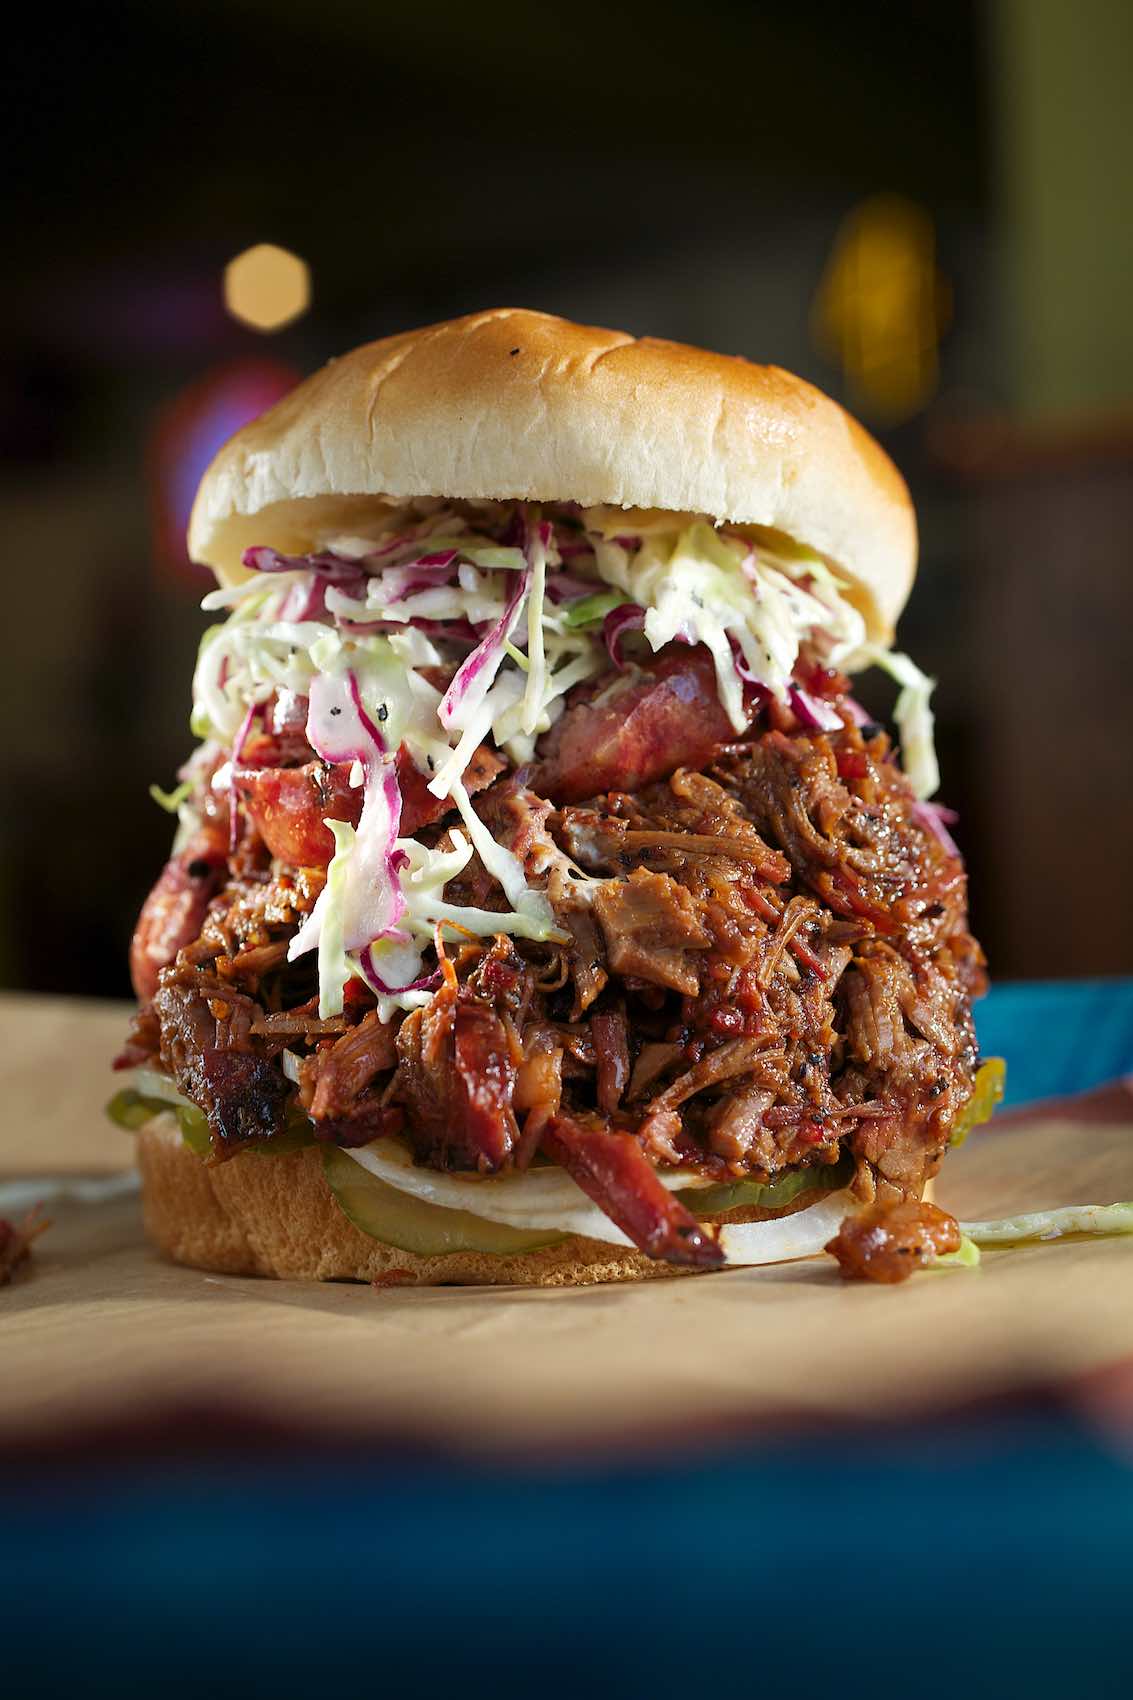 Jody Horton Photography - Barbecue sandwich with coleslaw at Franklin Barbecue.